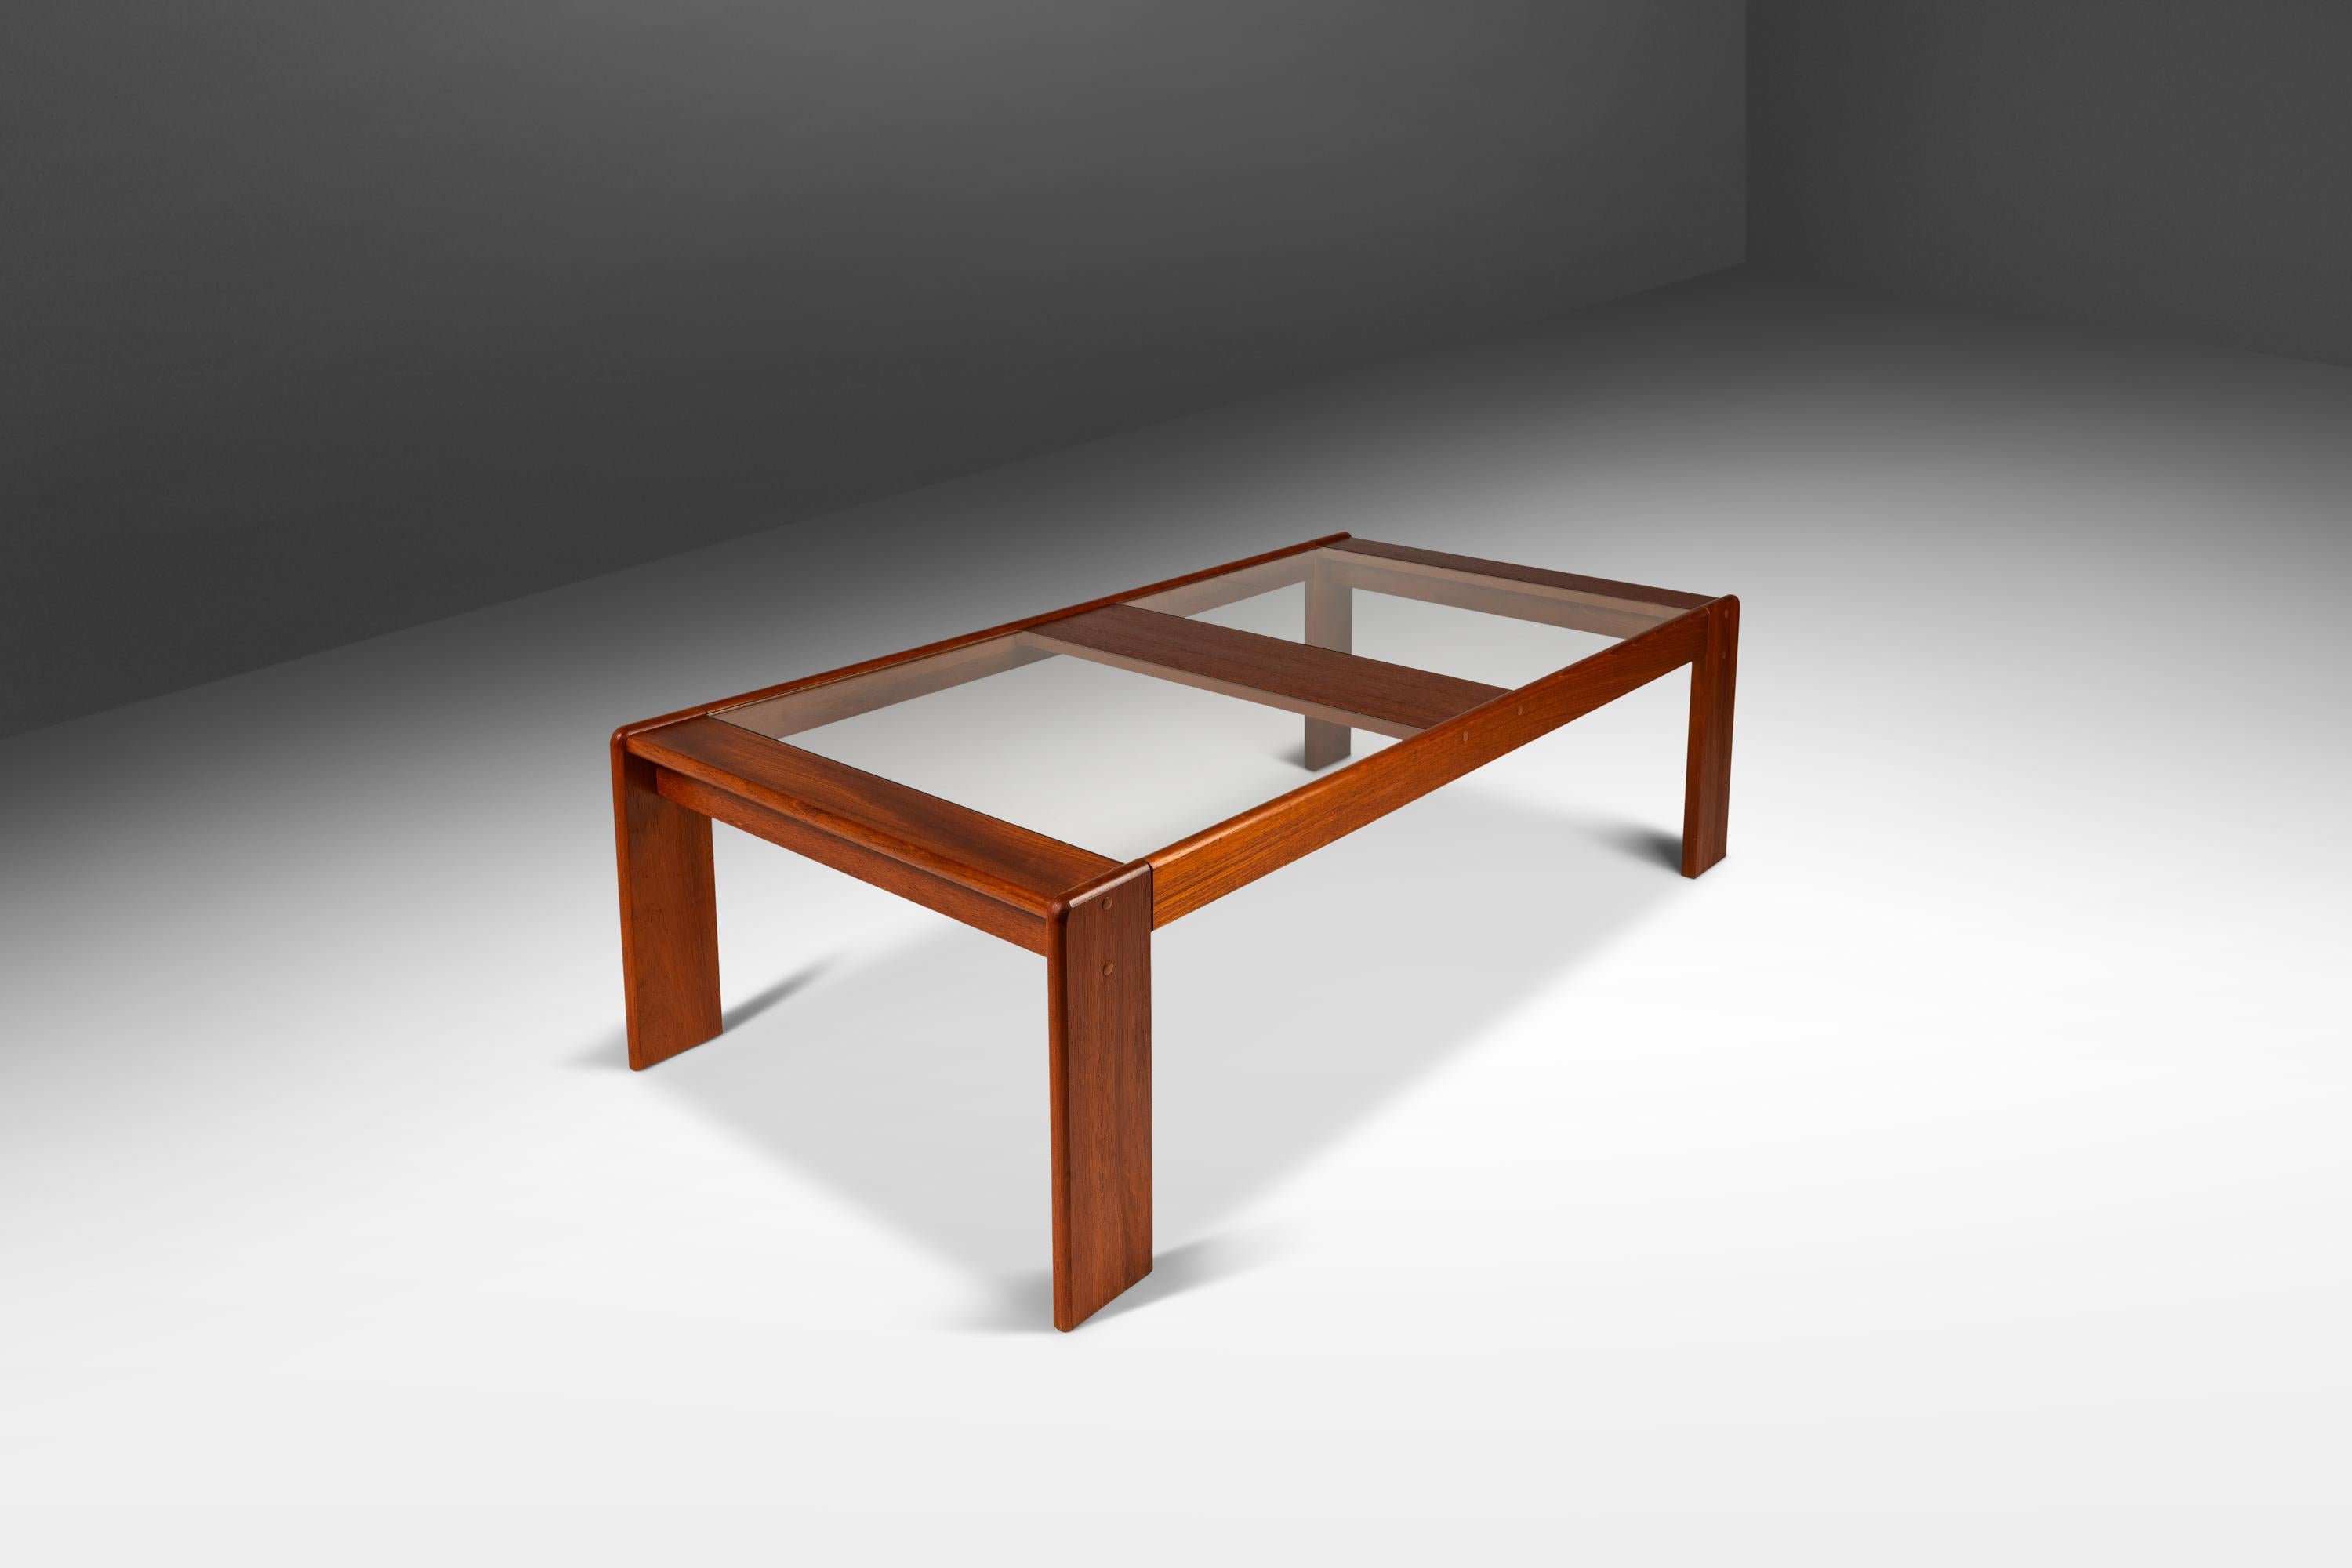 Introducing a stunning Danish-made coffee table that is as rare as it is aesthetically appealing. Constructed from a frame of solid Burmese teak with vibrant woodgrains and topped with two glass panels this table is simultaneously low-profile and